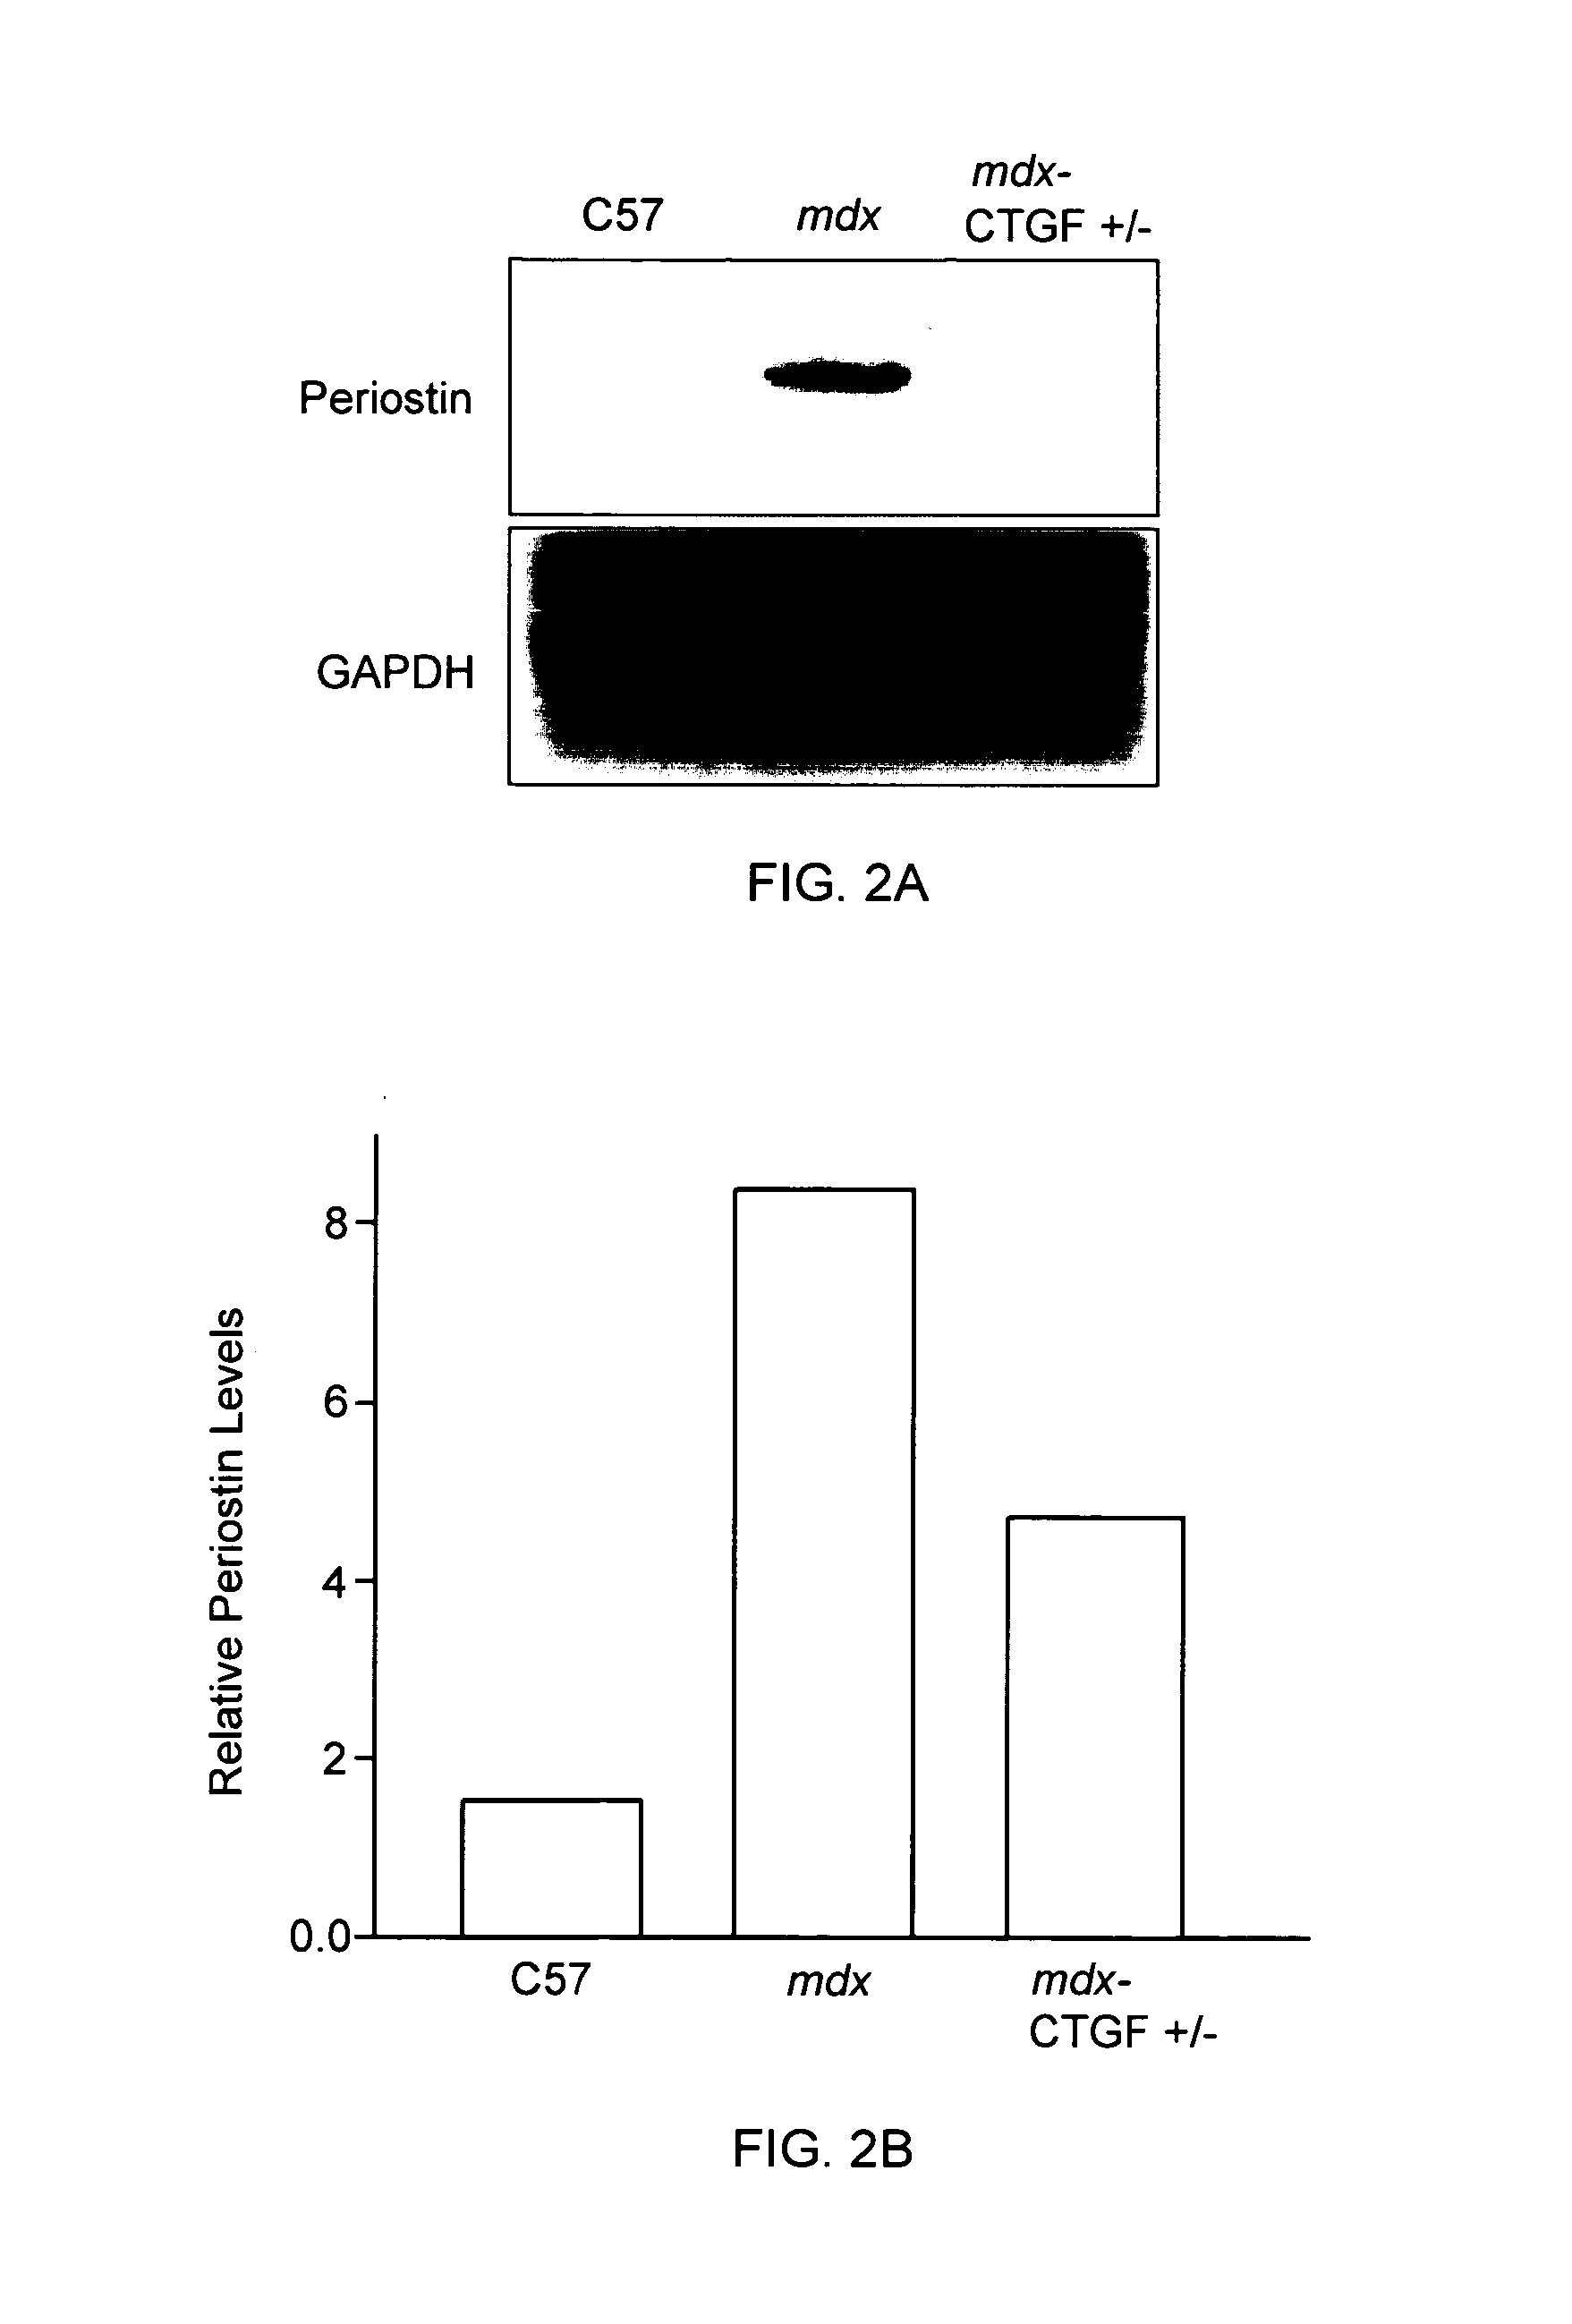 Methods for Treatment of Muscular Dystrophy